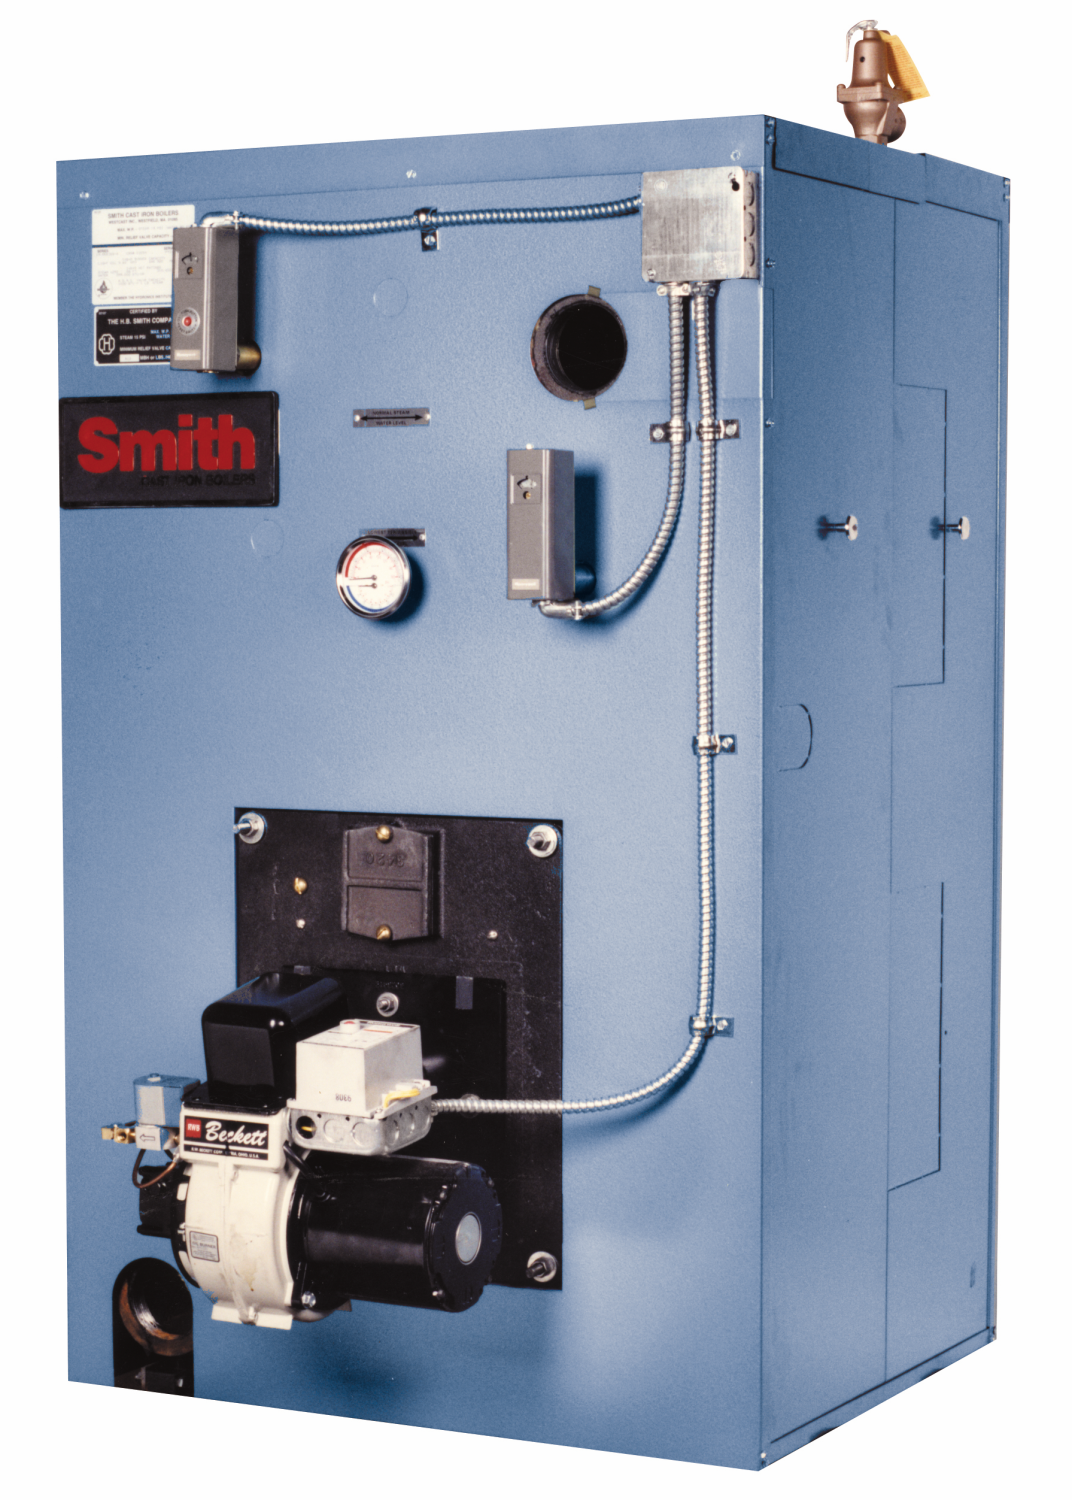 19HE Series - Commercial Boiler Sales in Michigan | Performance Engineering Group - 19A_Series_Boiler